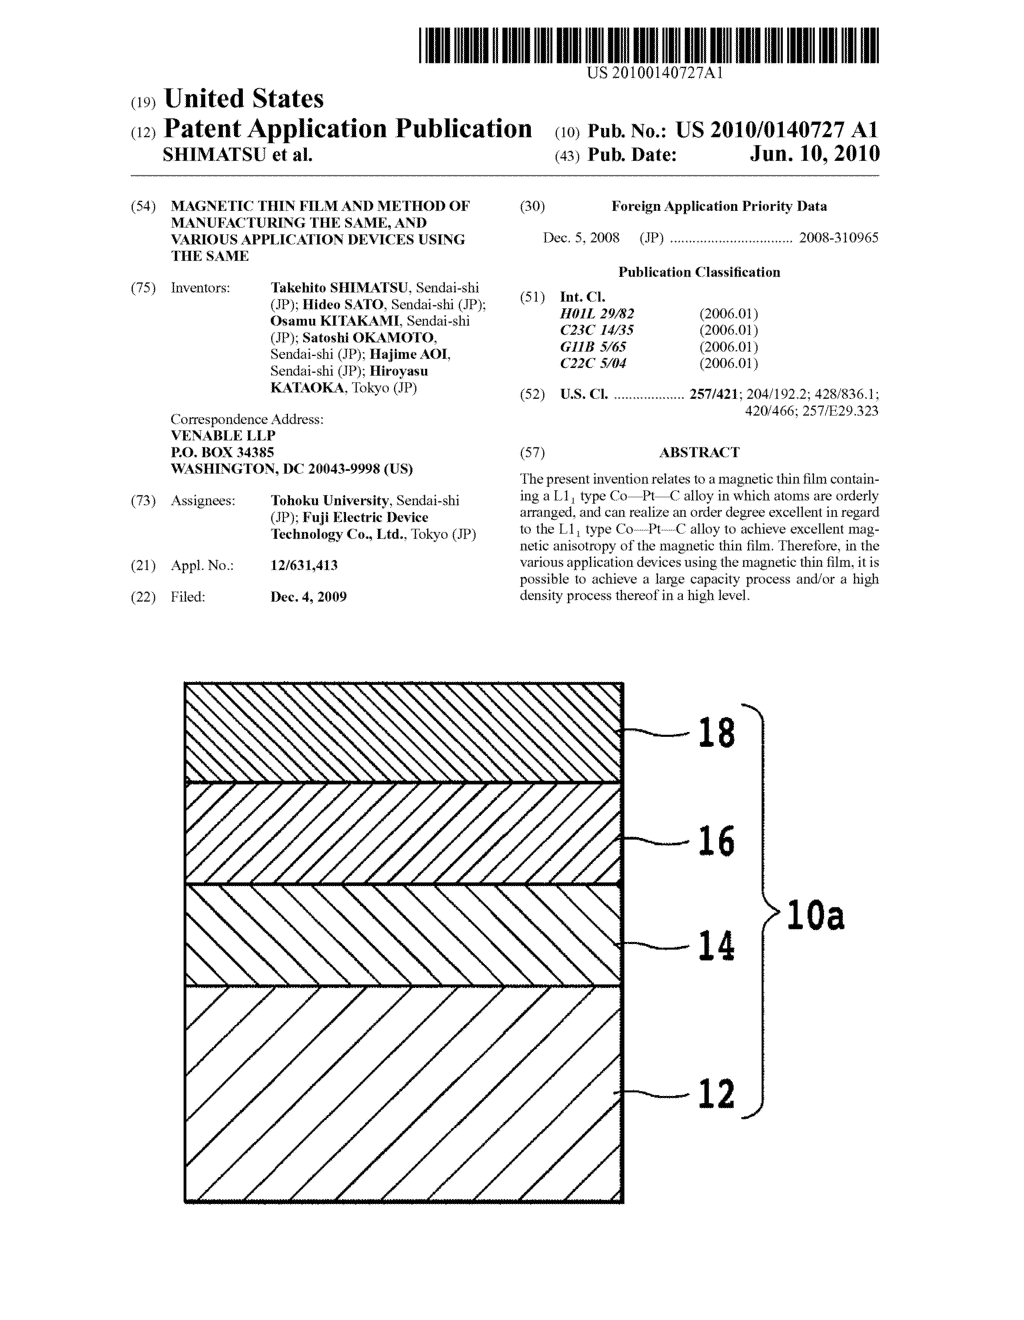 MAGNETIC THIN FILM AND METHOD OF MANUFACTURING THE SAME, AND VARIOUS APPLICATION DEVICES USING THE SAME - diagram, schematic, and image 01